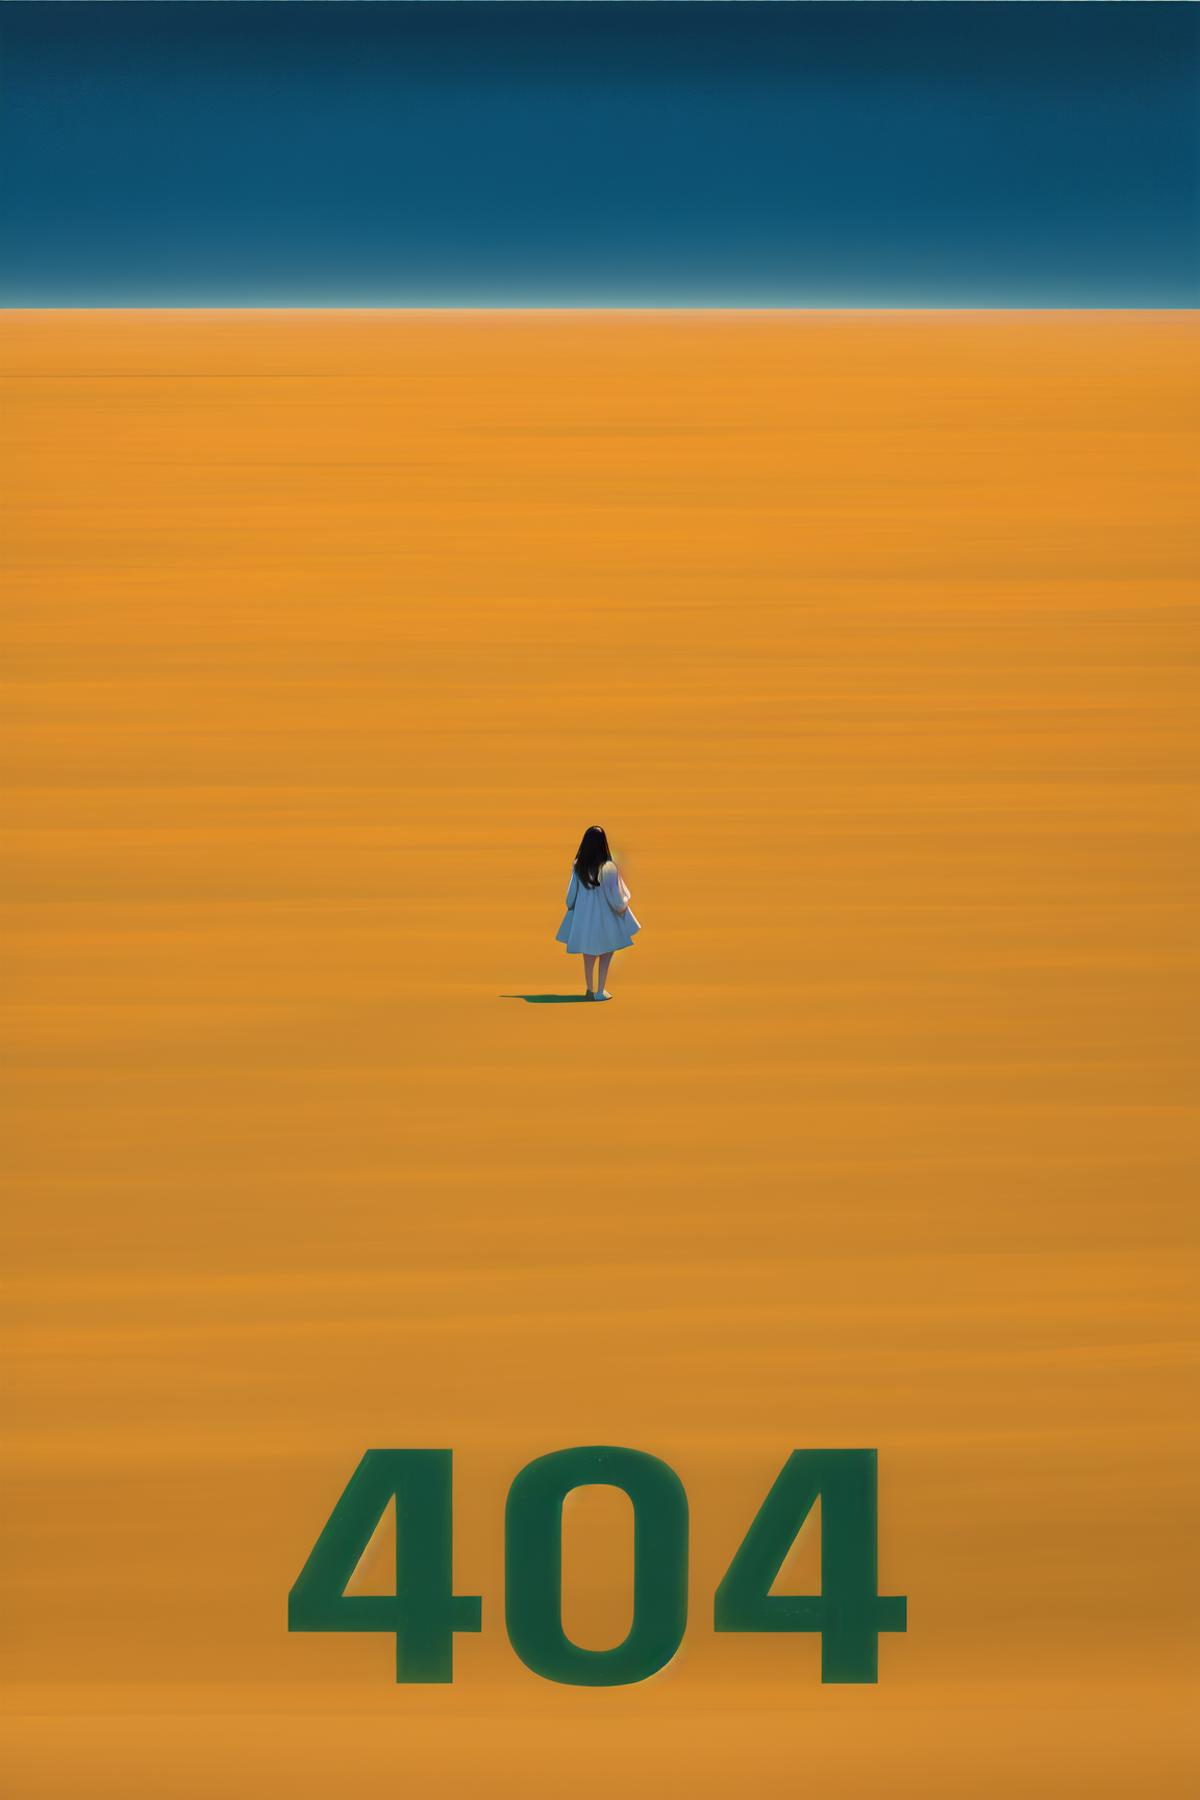 A young girl standing in a desert-like area with the number 404 in the top right corner.